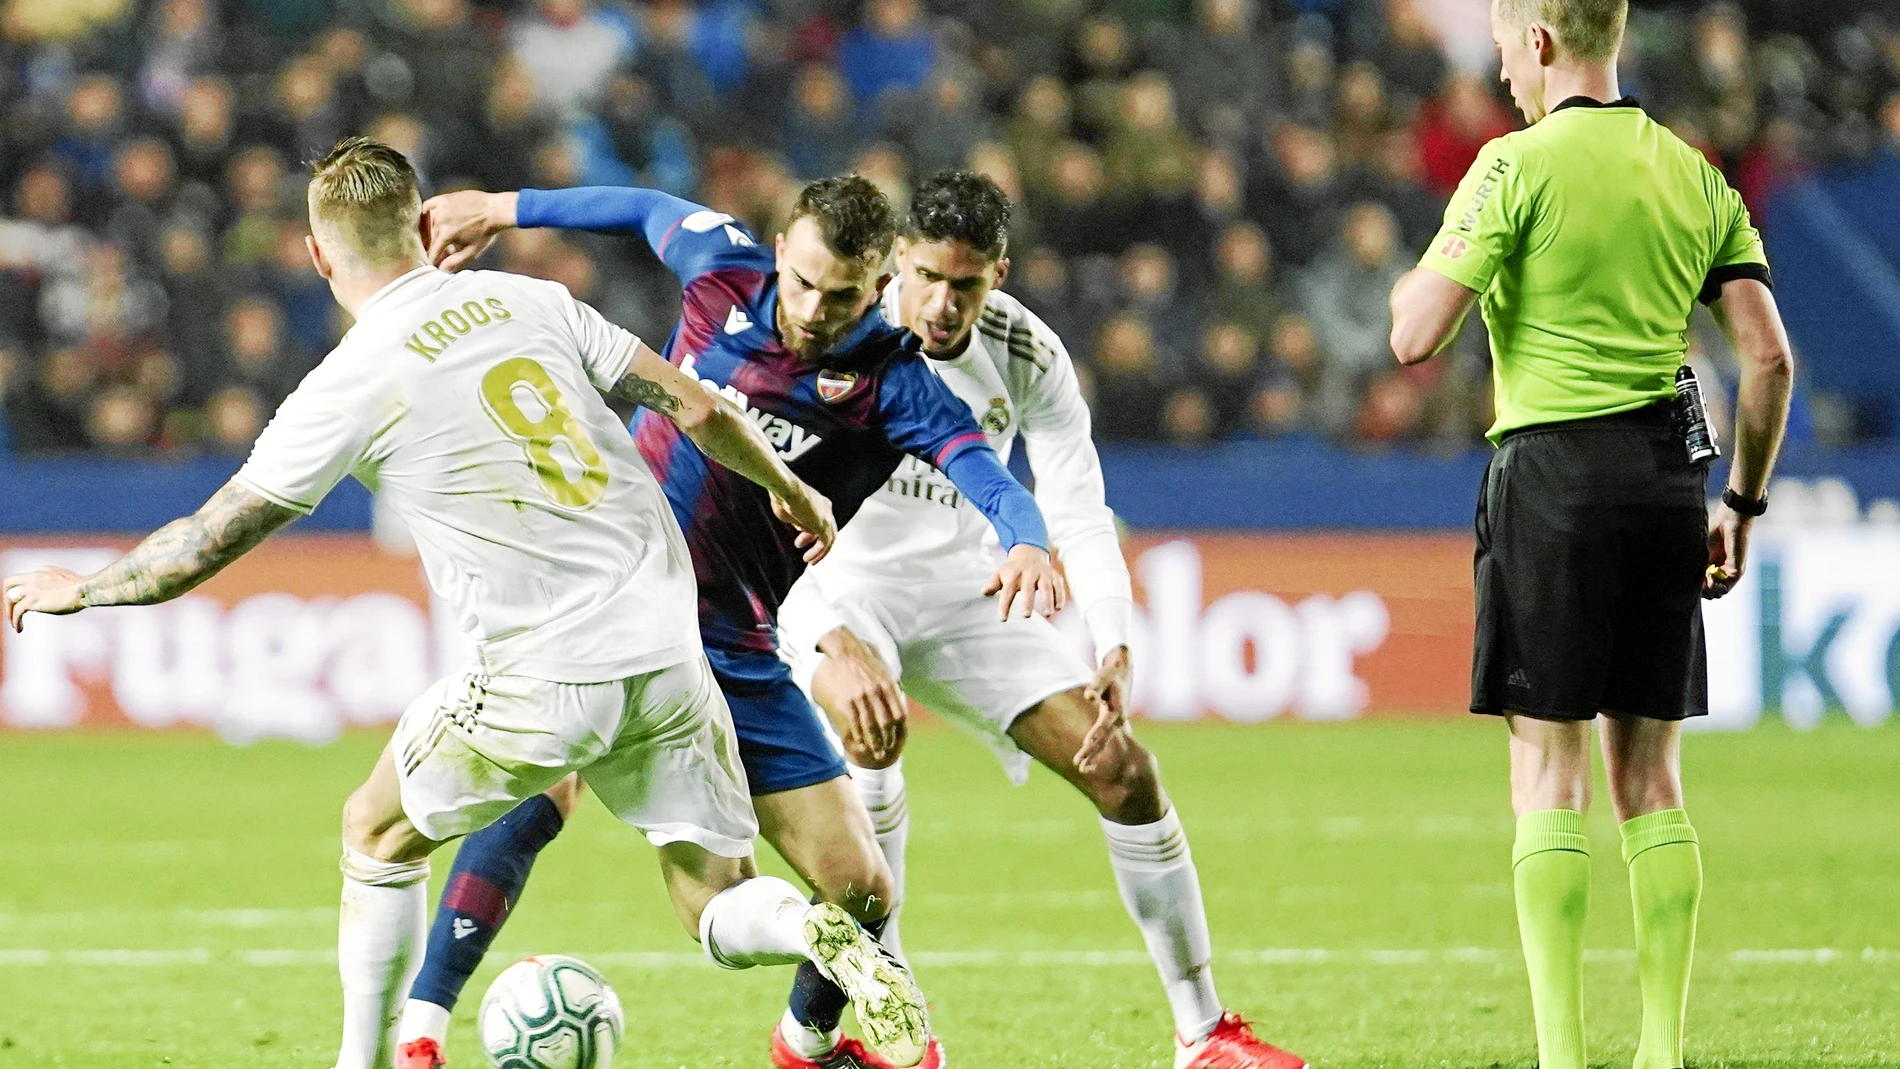 Levante's Borja Mayoral, second left, and Real Madrid's Toni Kroos, left, challenge for the ball during the Spanish La Liga soccer match between Levante and Real Madrid at the Ciutat de Valencia stadium in Valencia, Spain, Saturday, Feb.22, 2020. (AP Photo/Alberto Saiz)